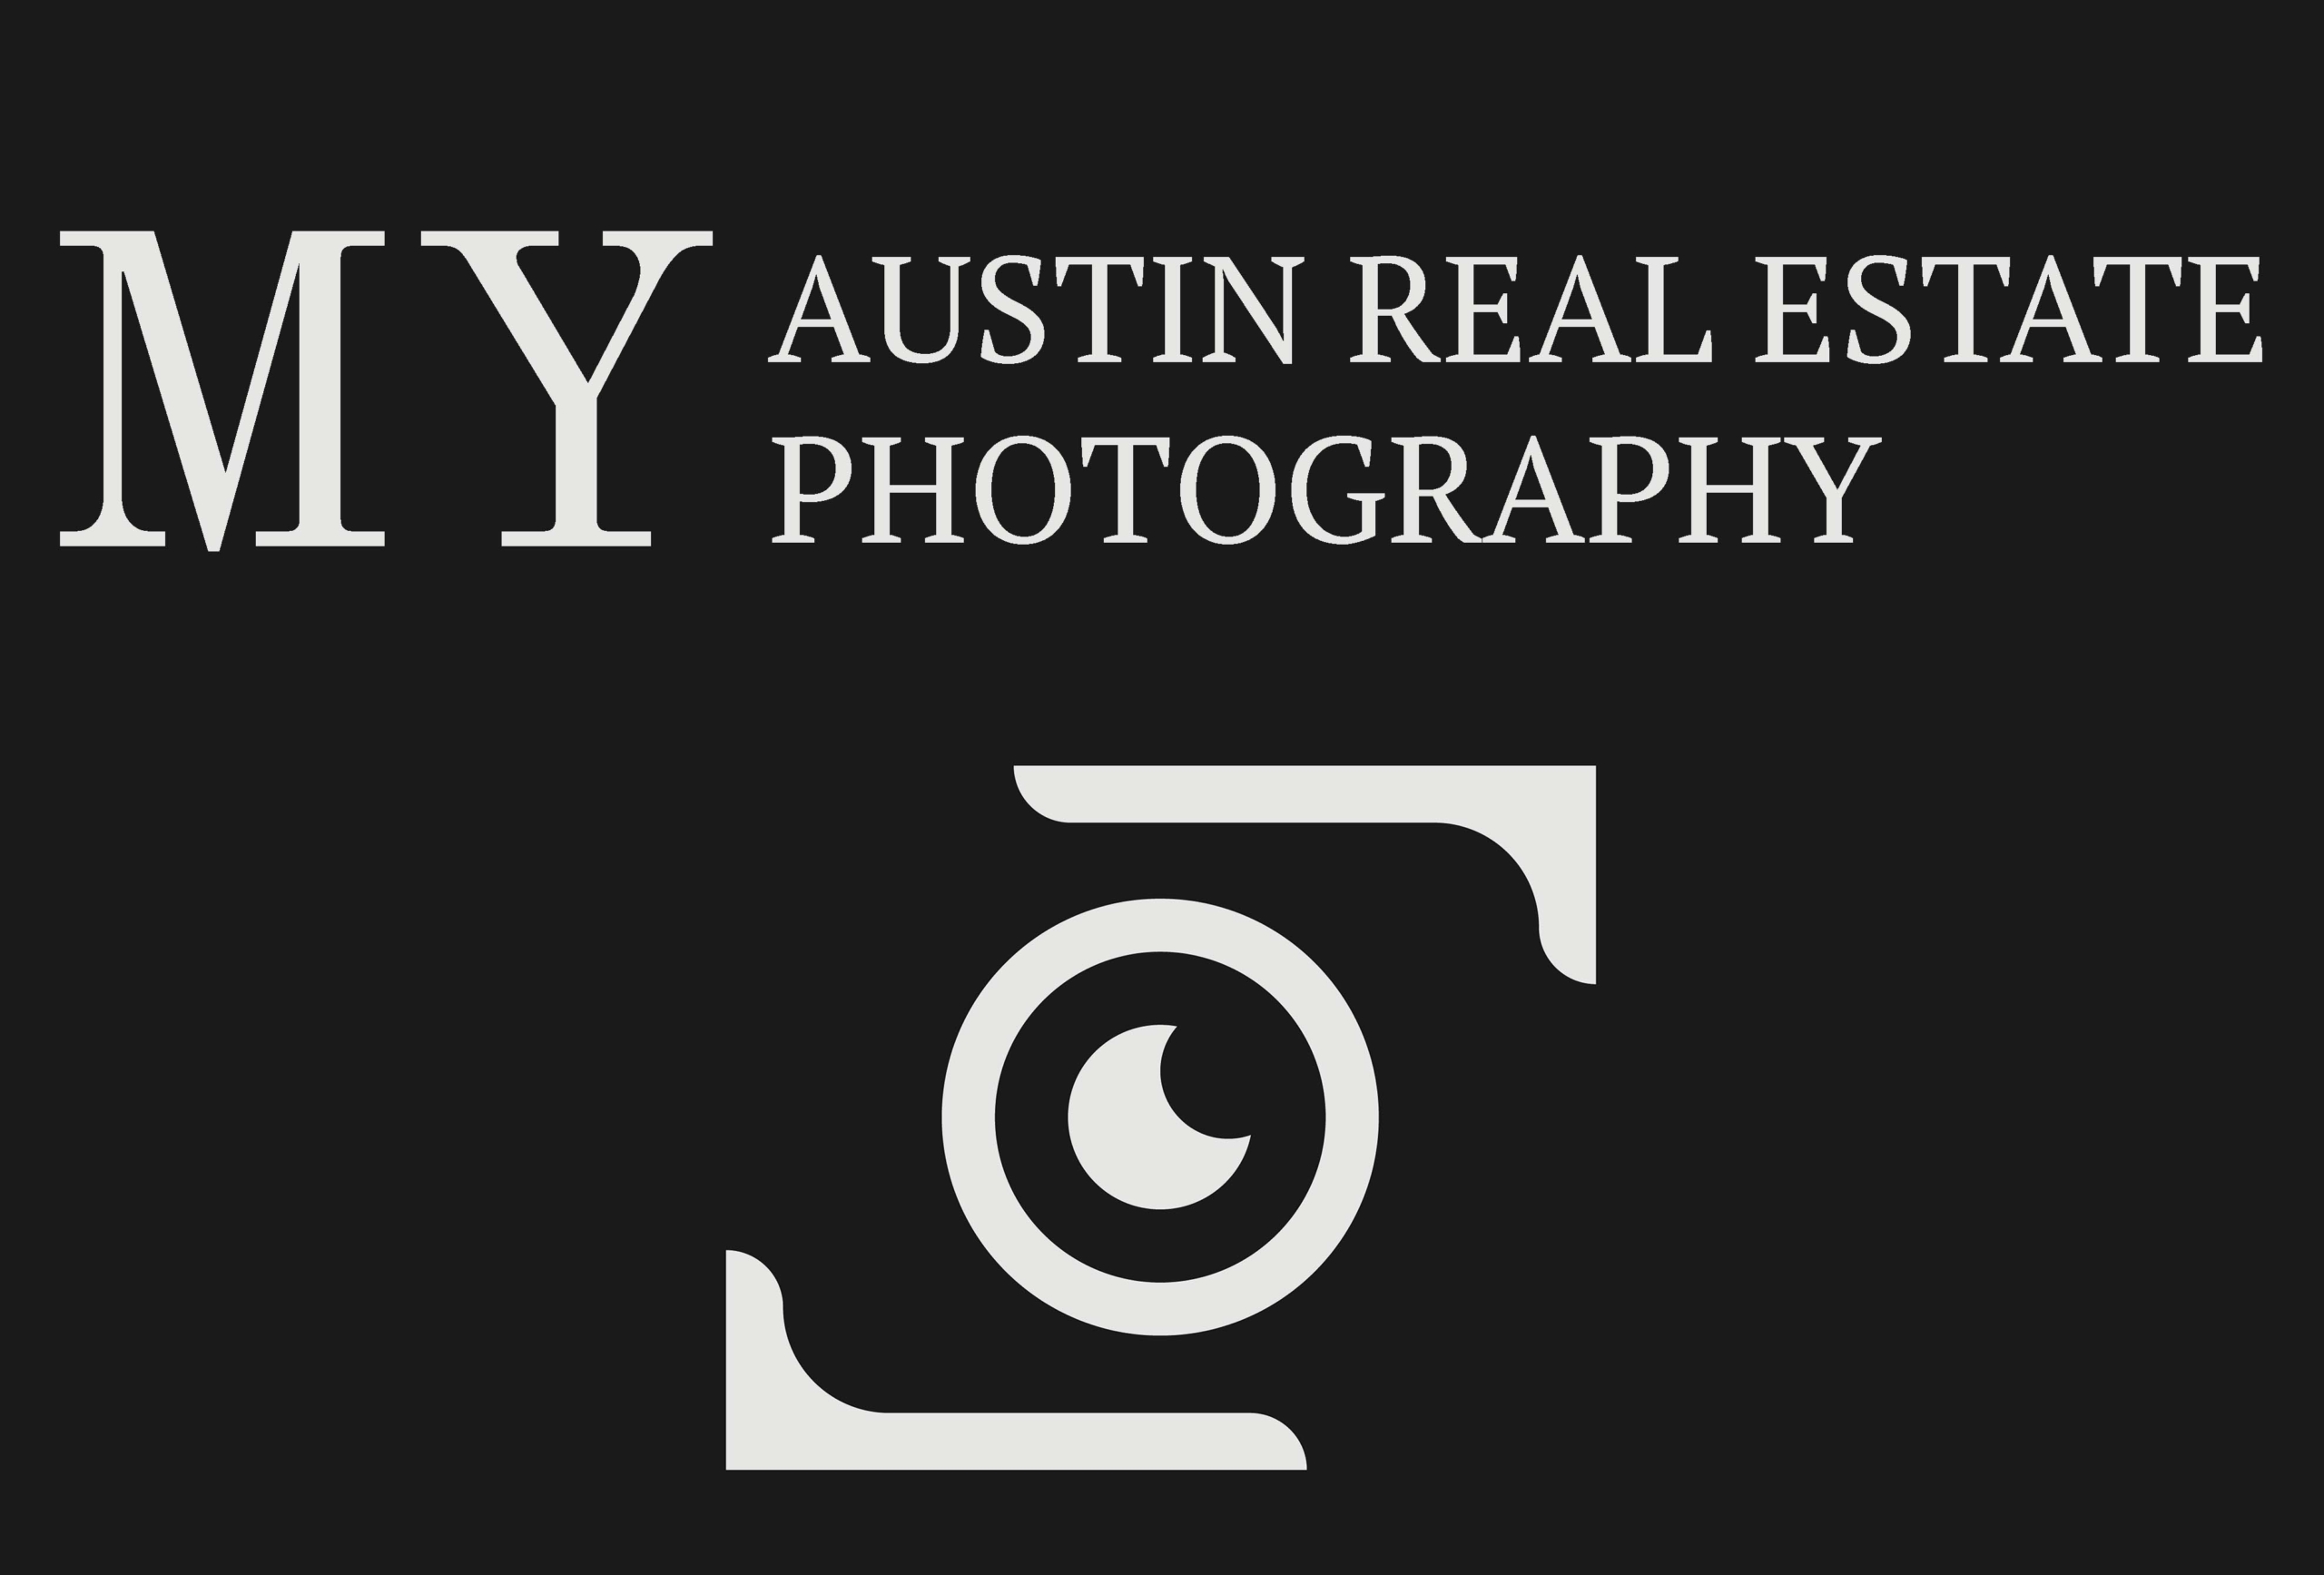 My Austin Real Estate Photography